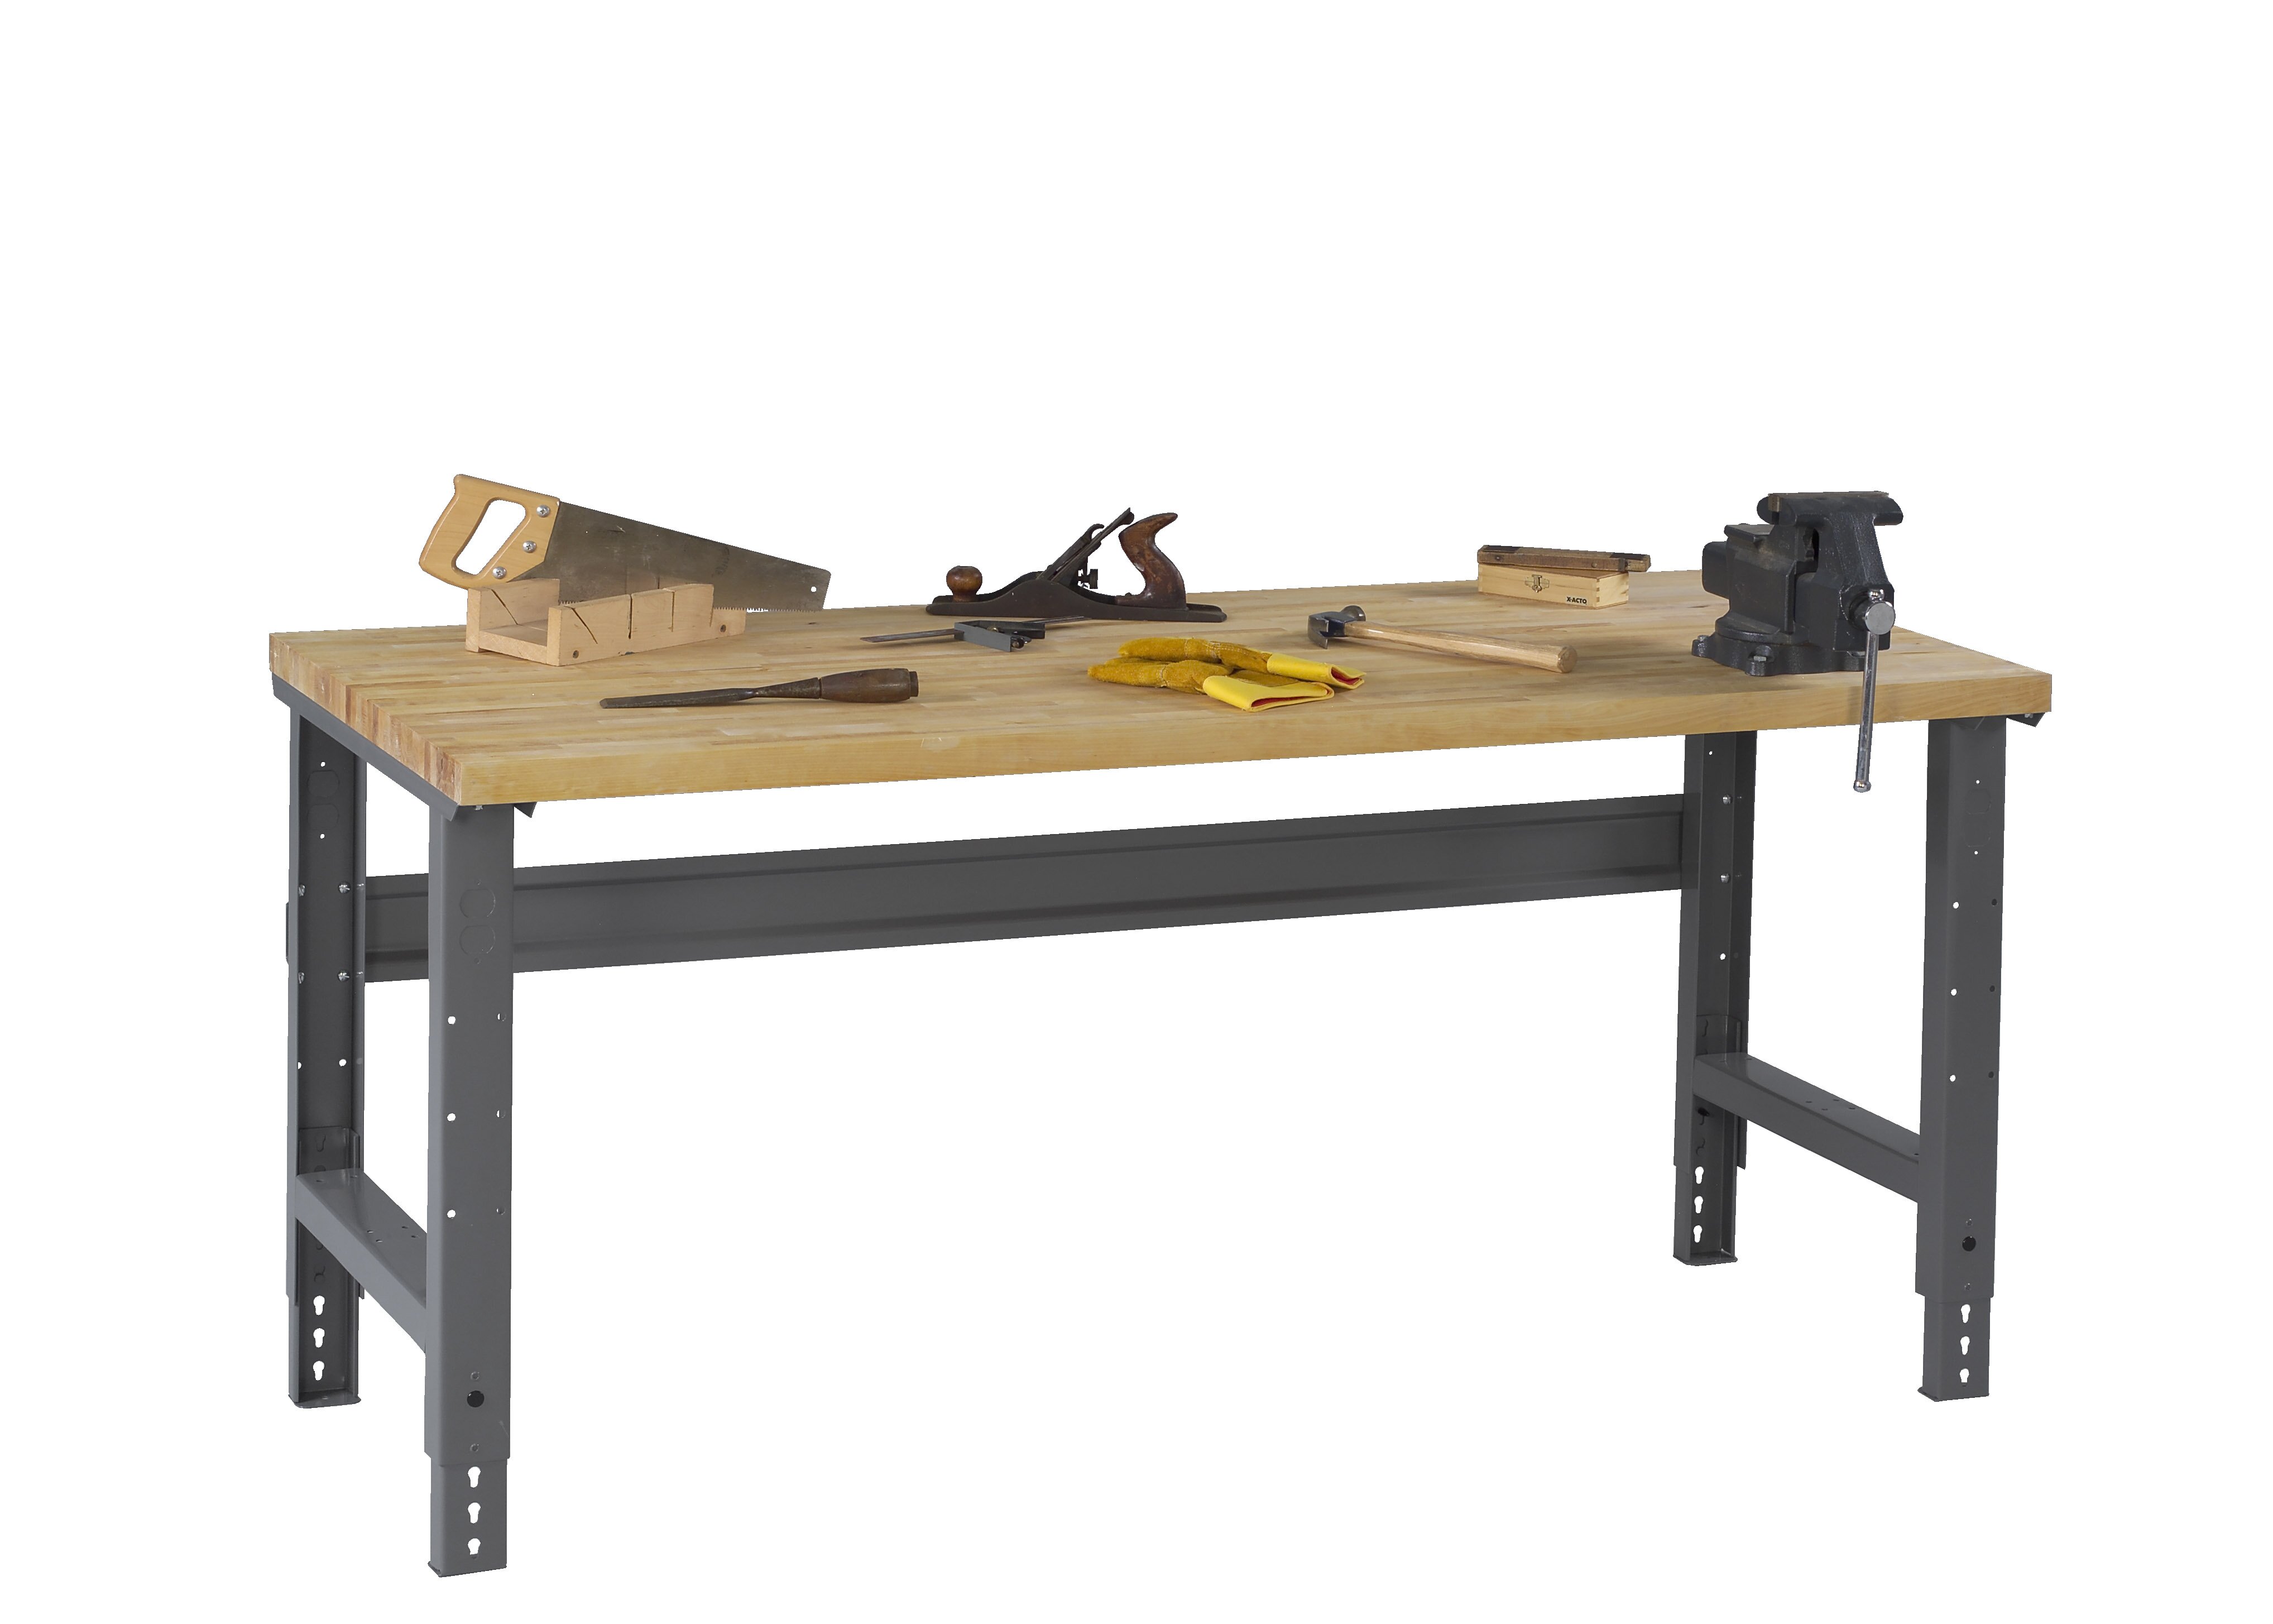 Work Bench Legs for Best Your Workspace Furniture Design: Adjustable Table Legs Home Depot | Workbench Prices | Work Bench Legs